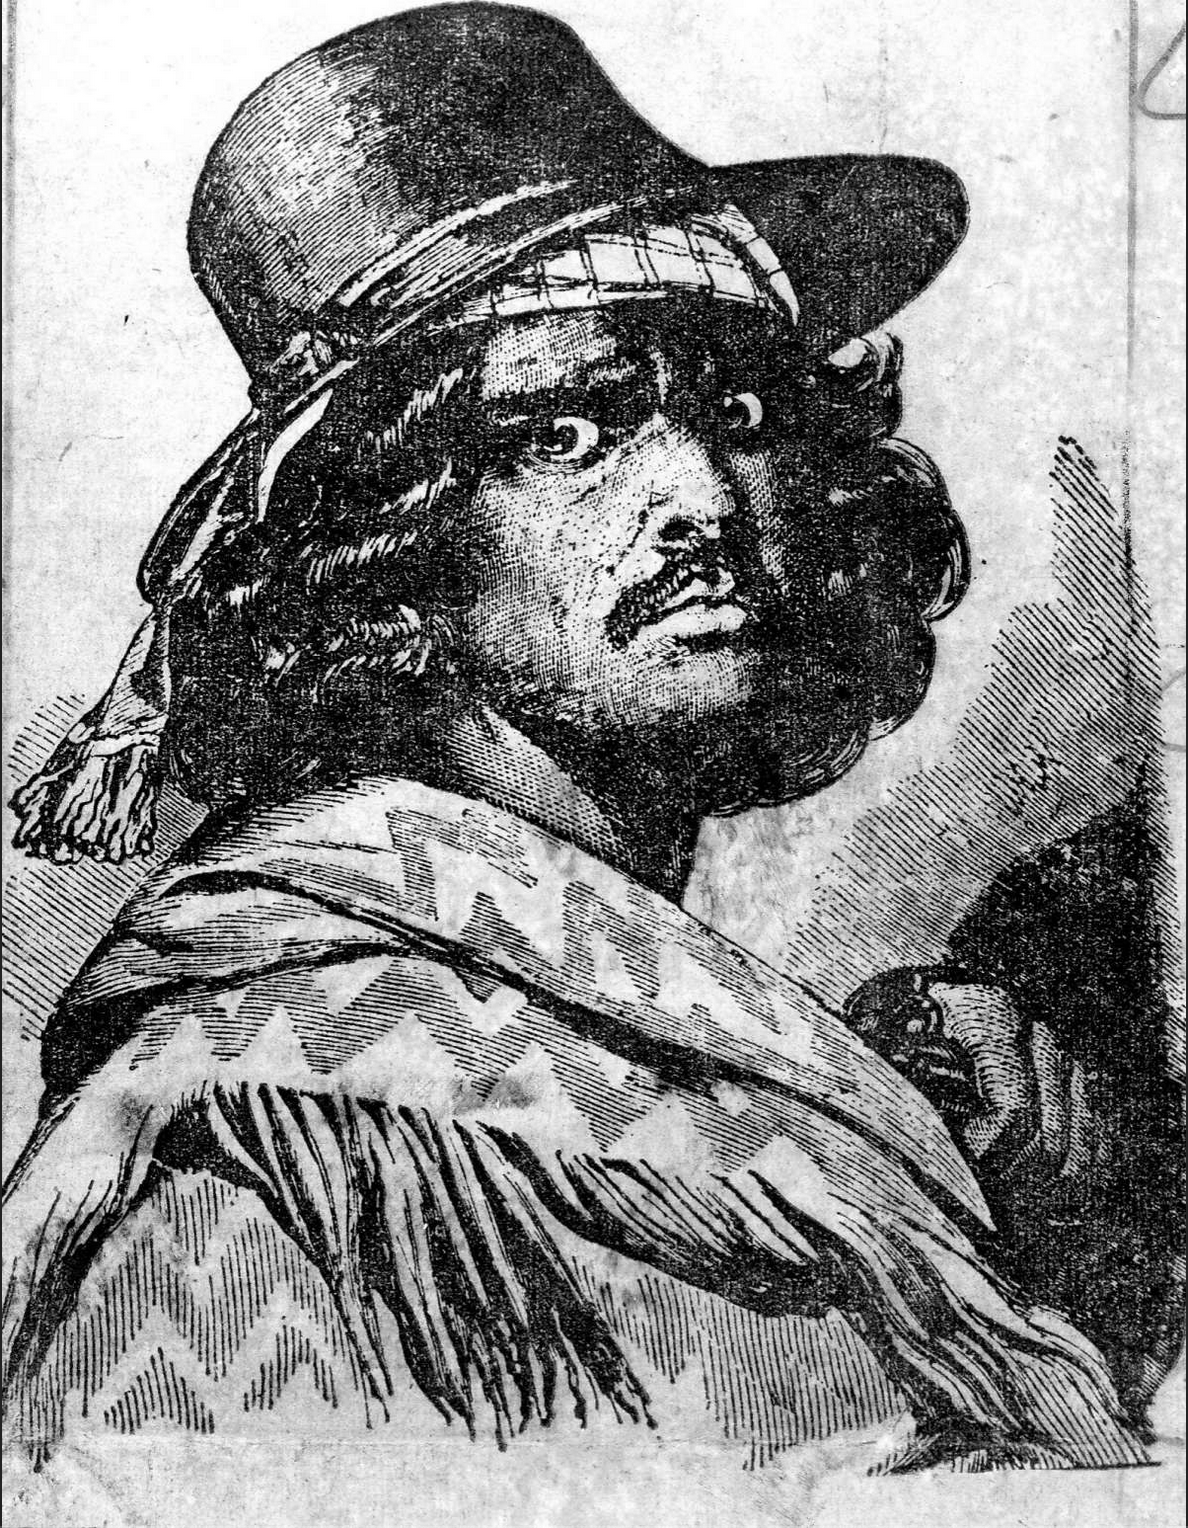 Illustration of Joaquin Murrieta, "the Robin Hood of the West," by Thomas Armstrong, circa 1851.